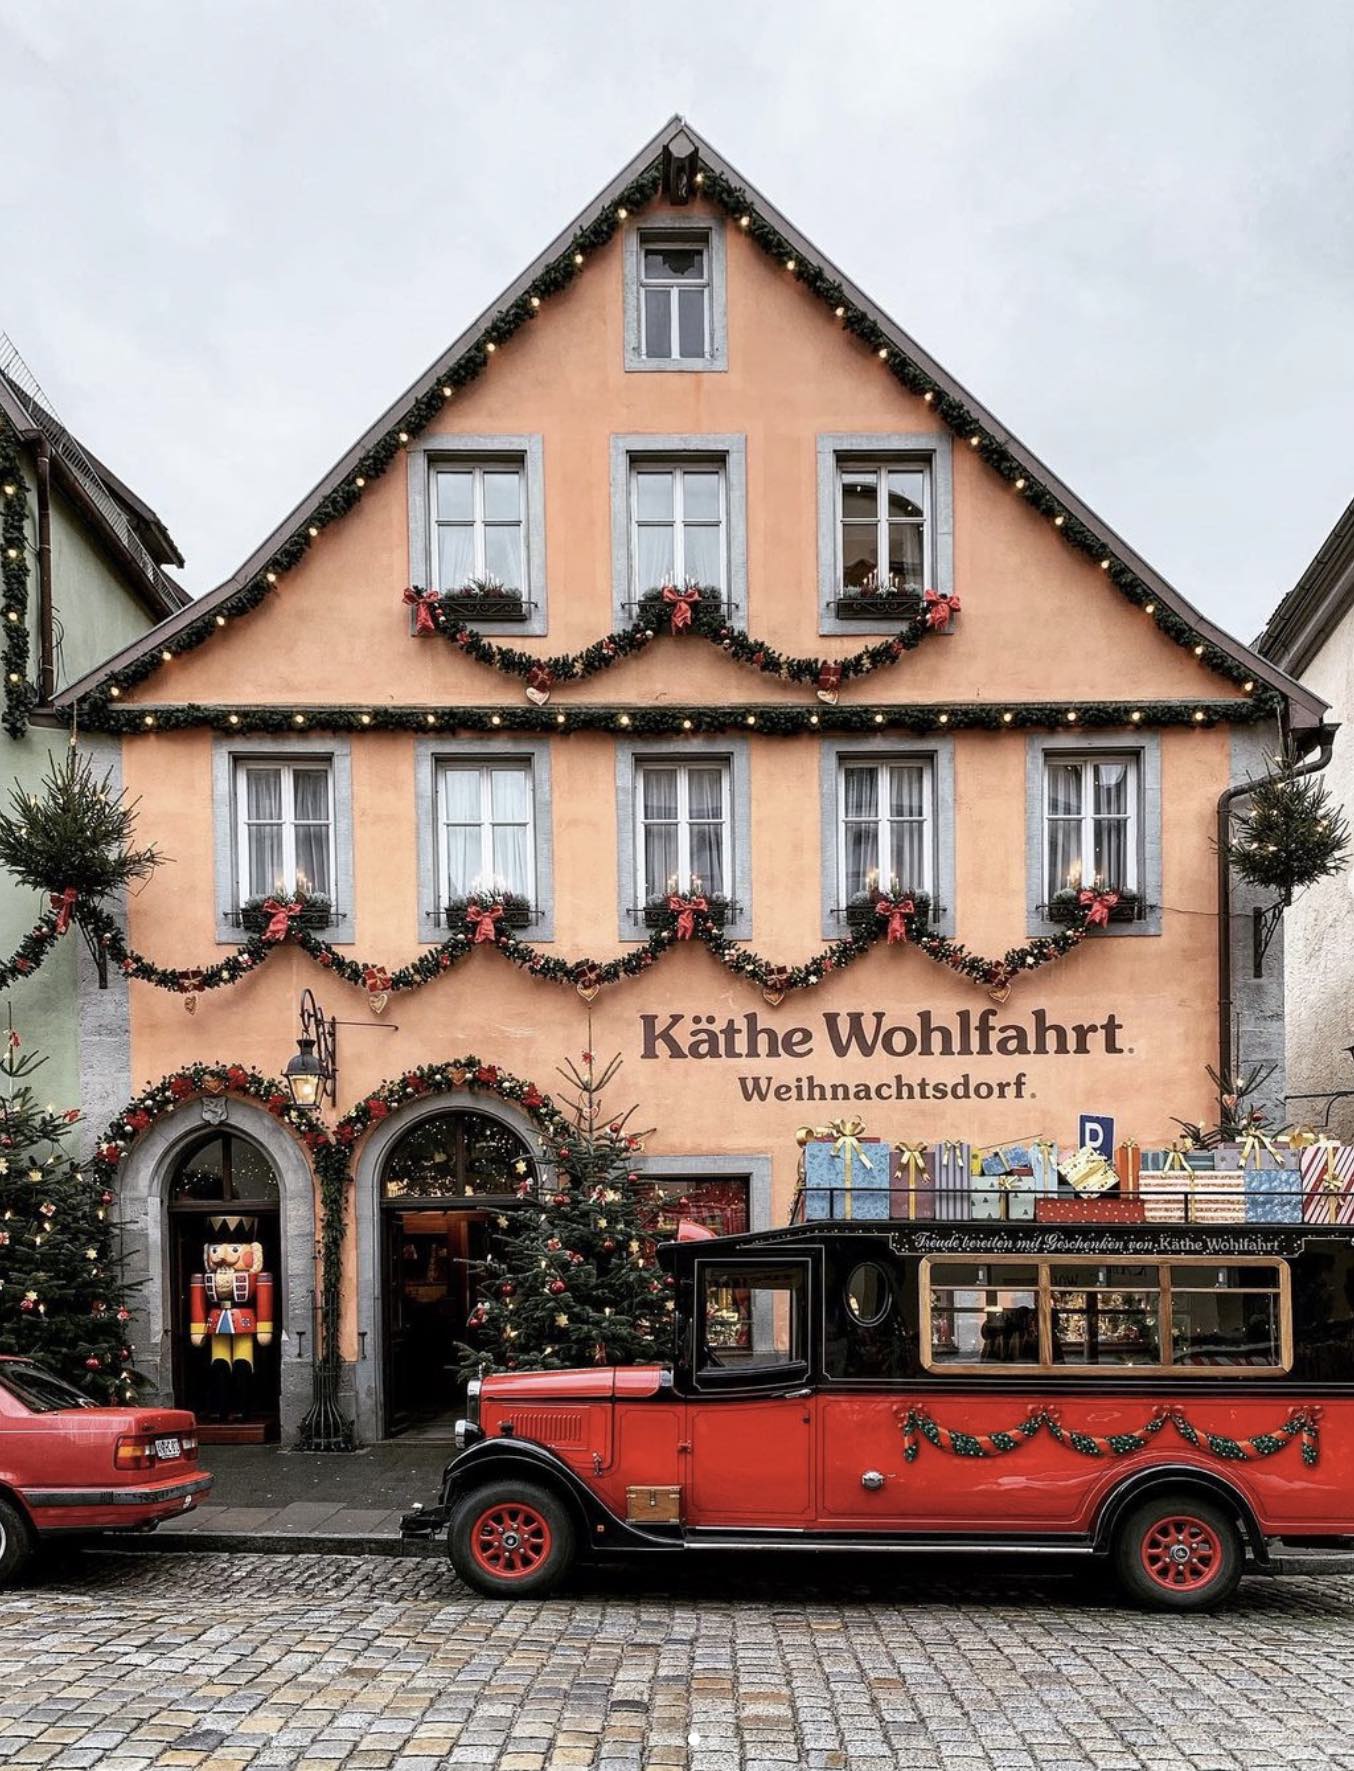 Rothenburg ob der Tauber must find itself on your list of Europe's best Christmas markets // Photo Credit @_s00__